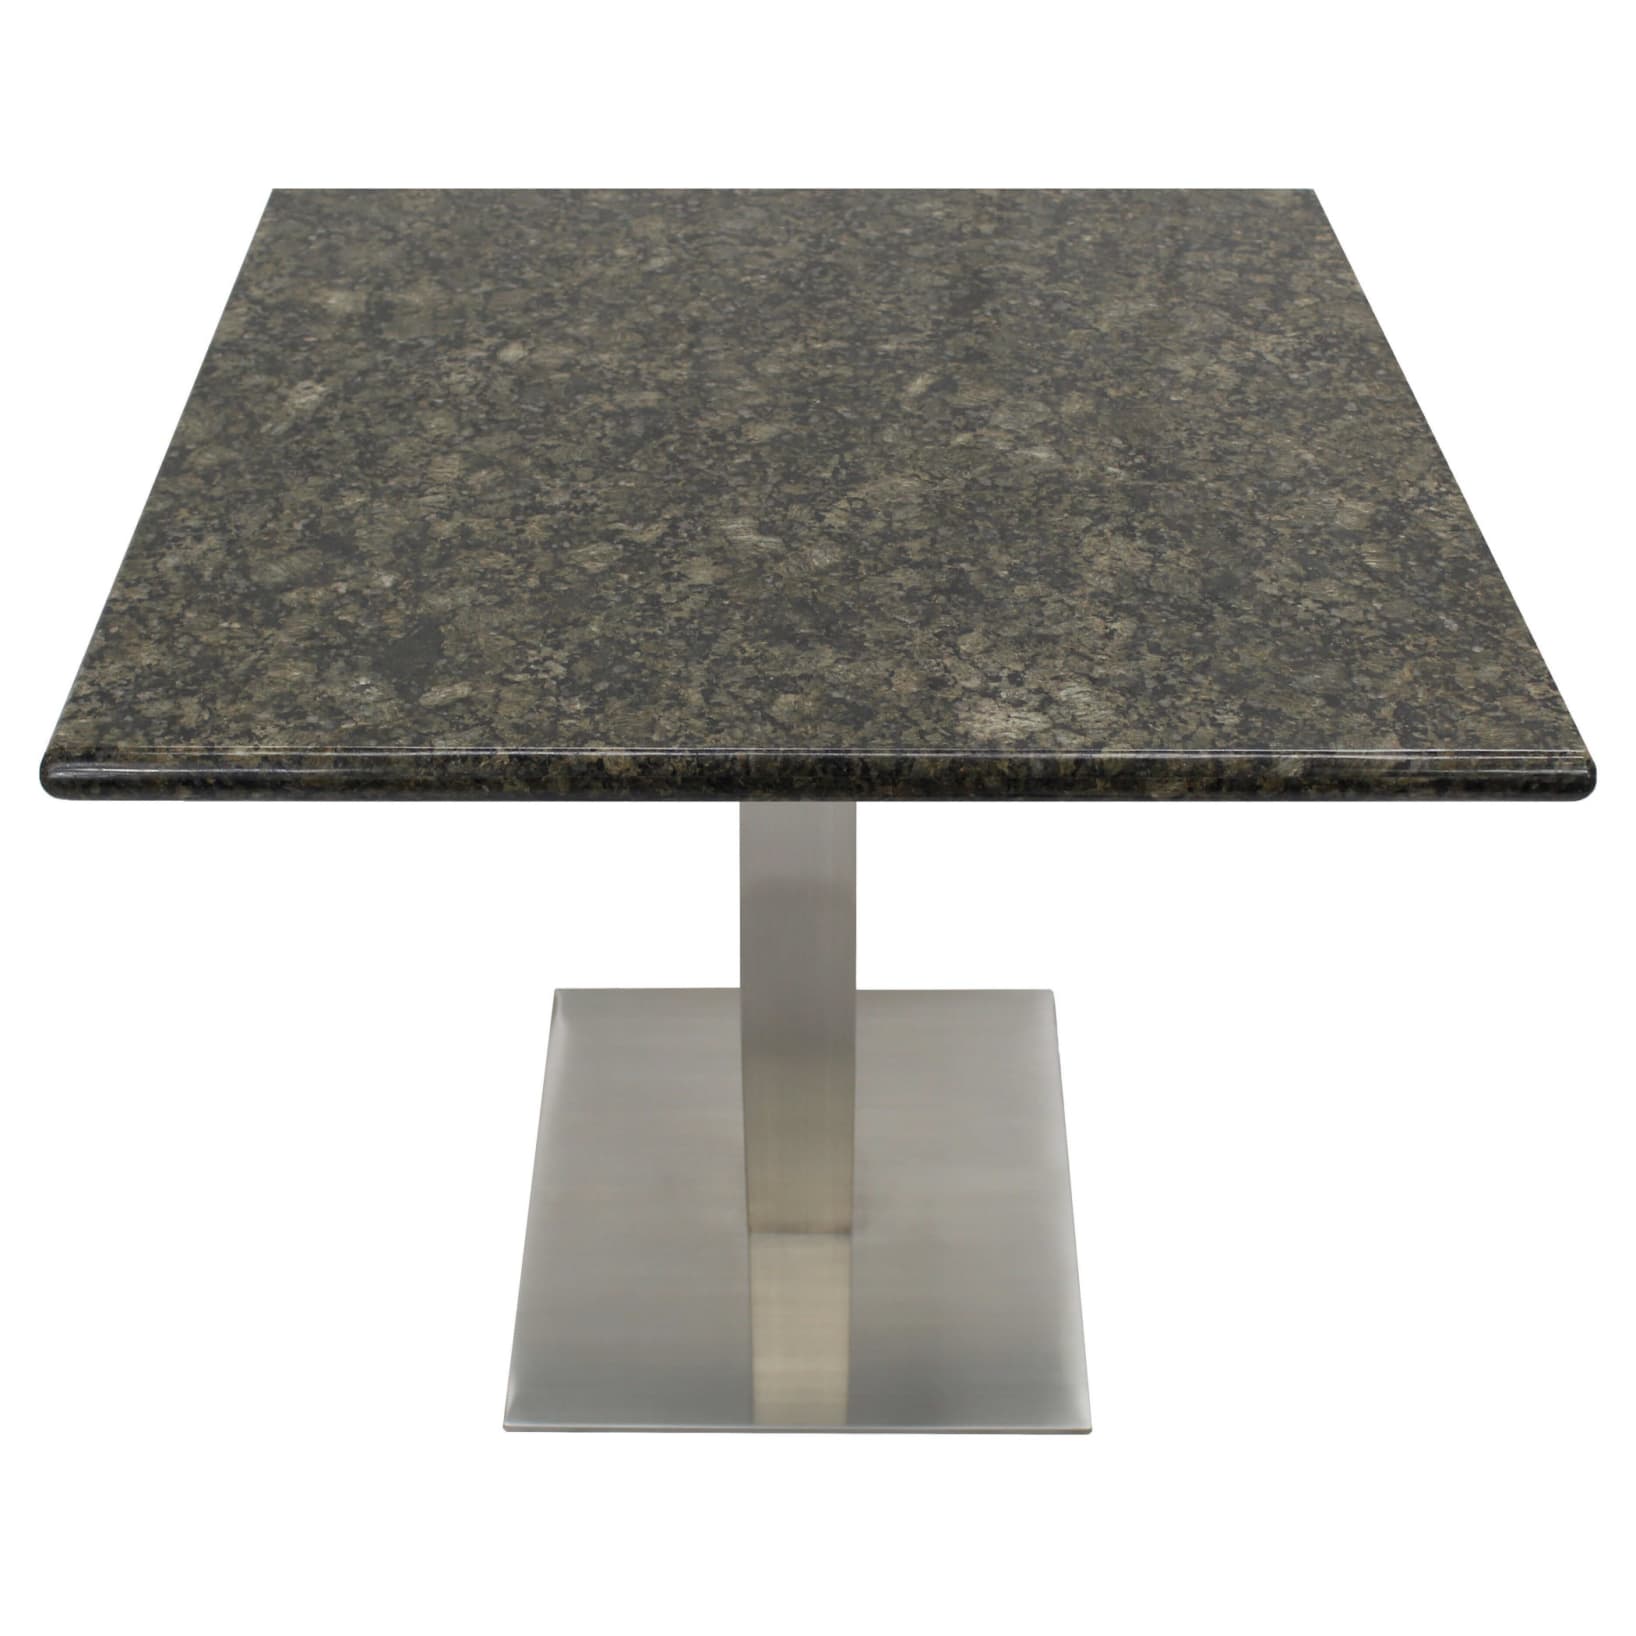  table with granite top